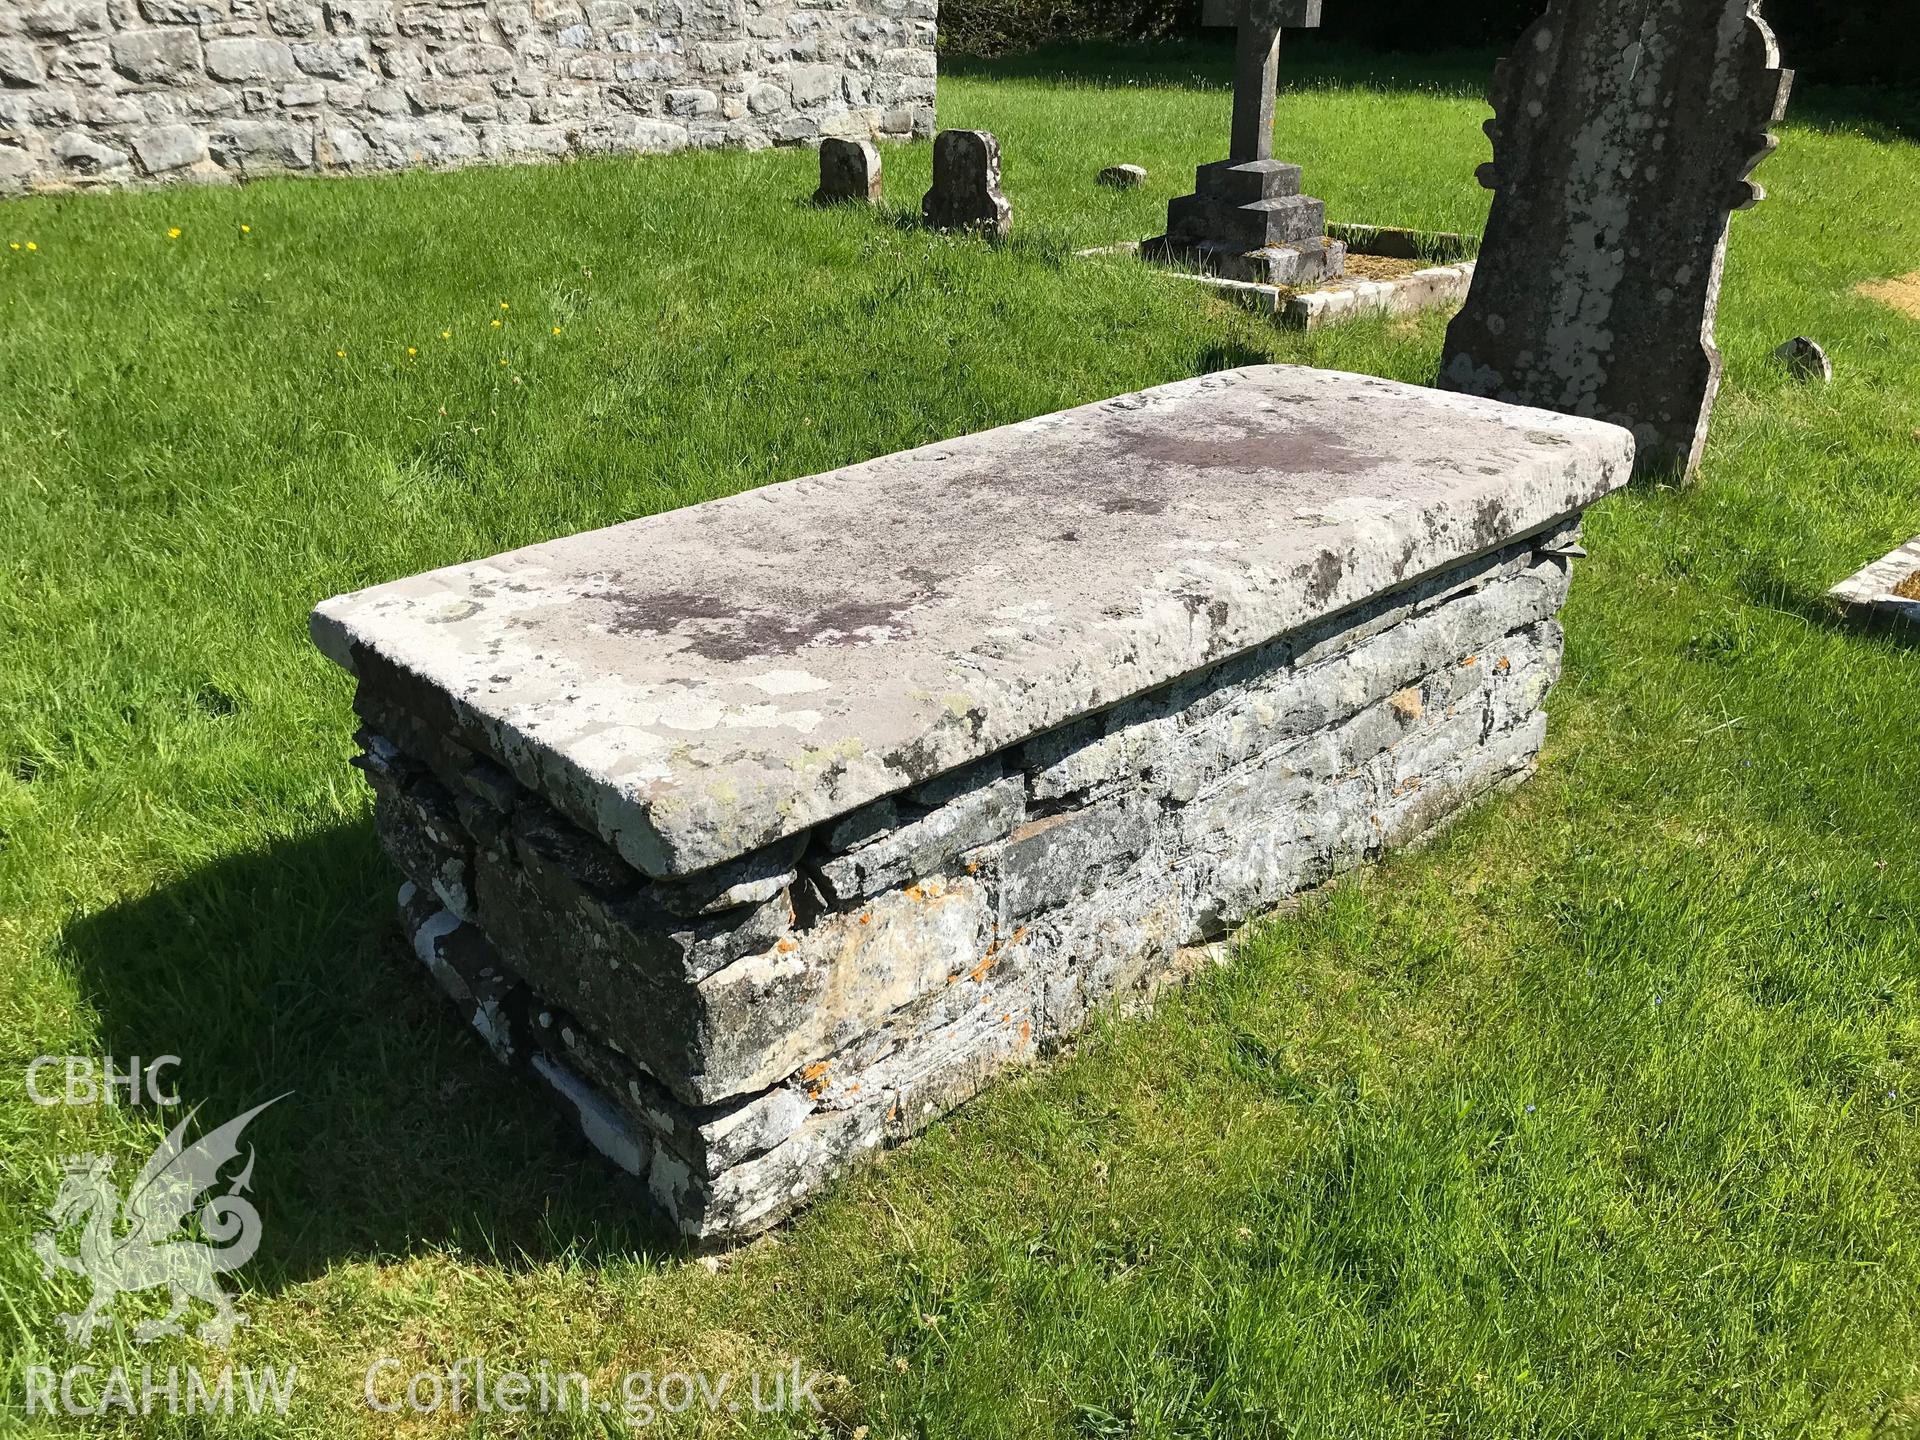 Colour photo showing St. Afan's Tomb in the graveyard at the church of St. Afan, Llanafanfawr, taken by Paul R. Davis, 19th May 2018.